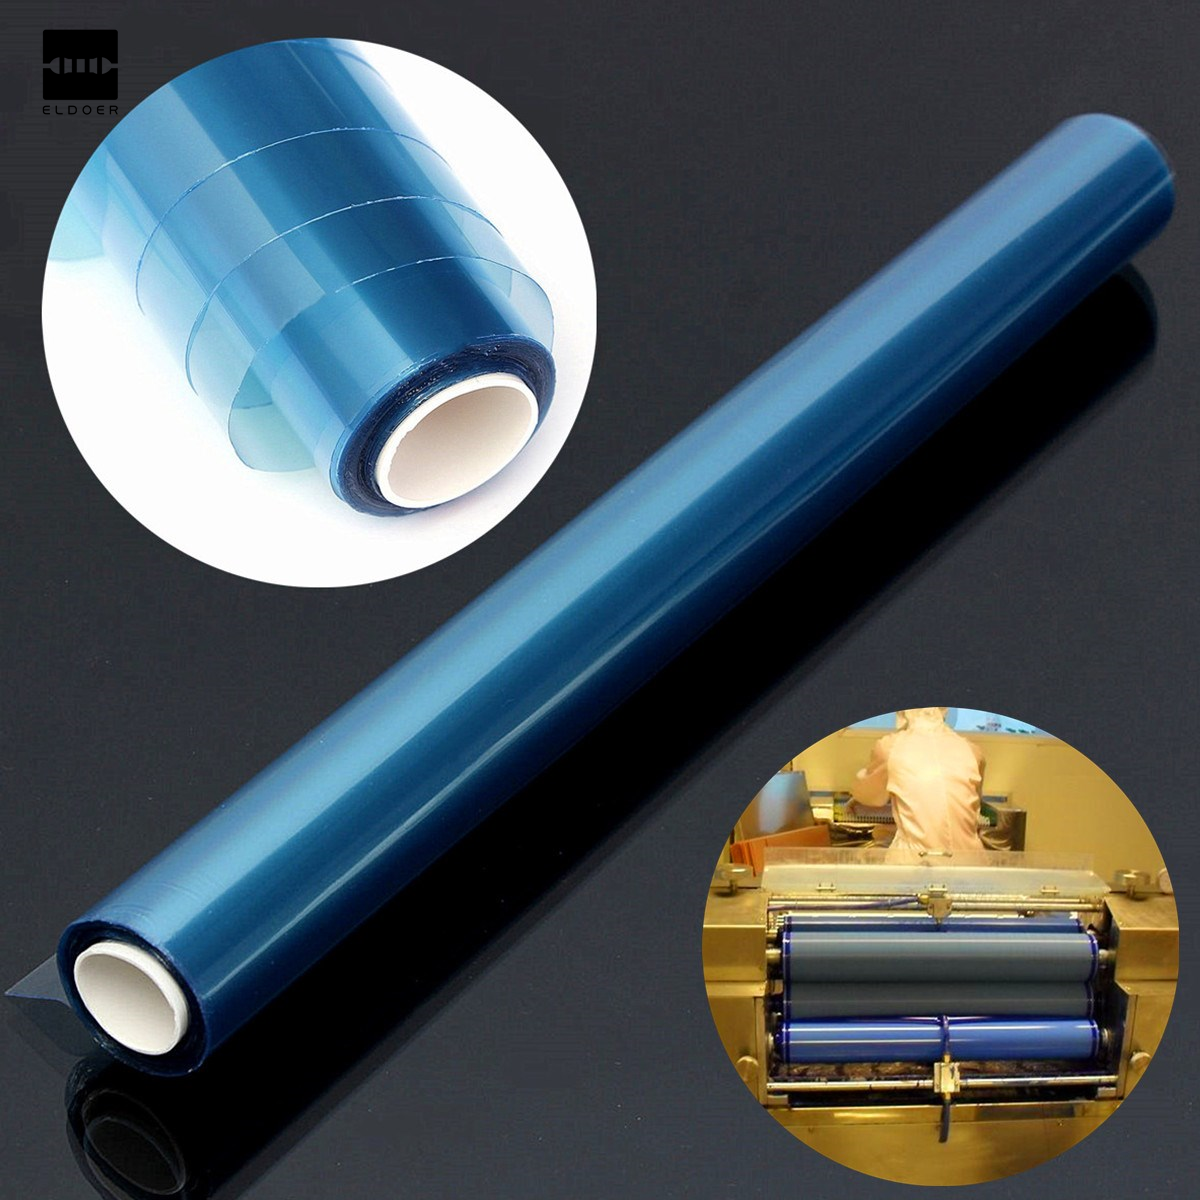 2020 PCB Portable Photosensitive Dry Film for Circuit Production Photoresist Sheets 30cm x 5m For plating hole covering etching